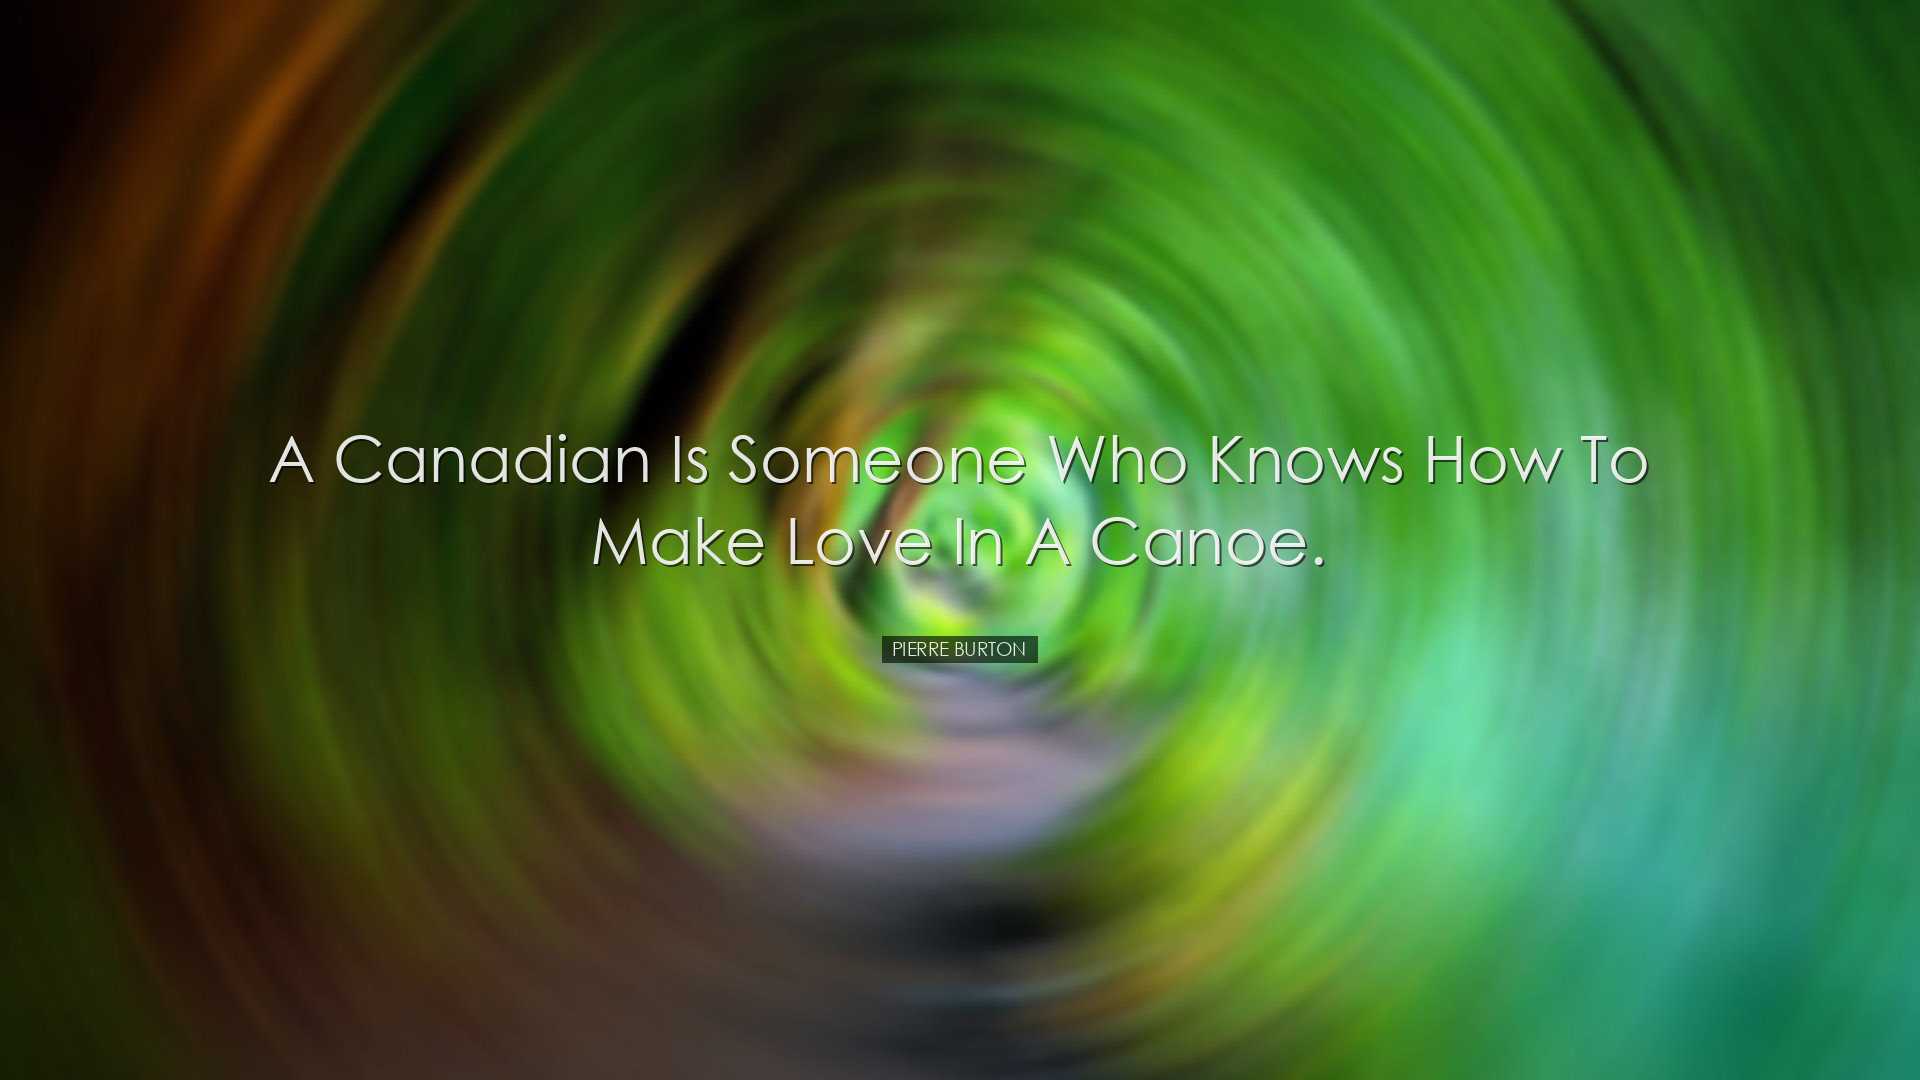 A Canadian is someone who knows how to make love in a canoe. - Pie